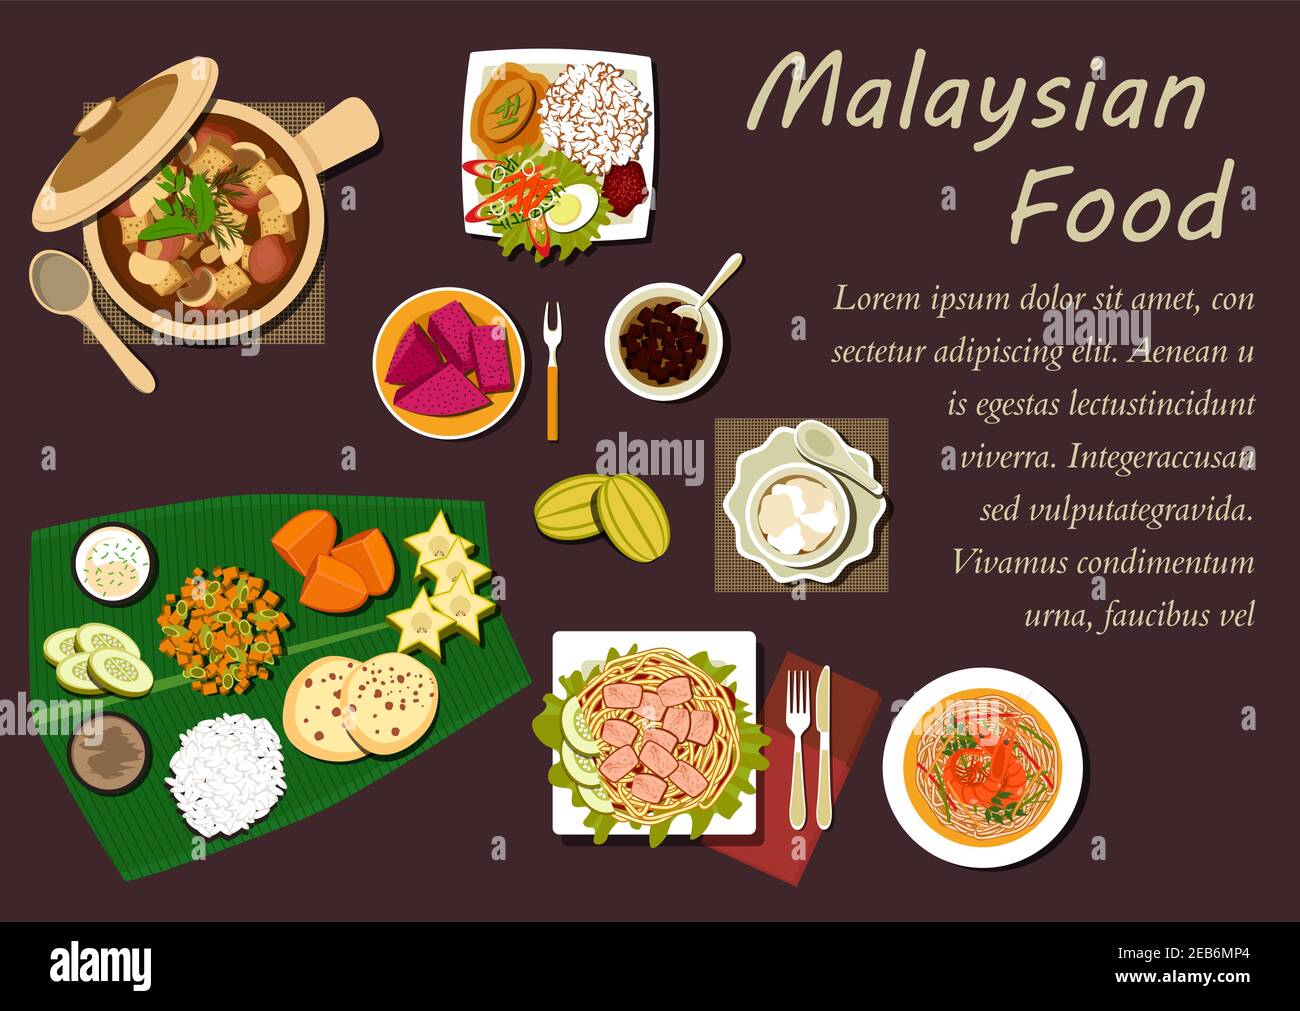 Malaysian cuisine with nasi lemak rice, prawn noodle, tofu noodle with curry, pork stew with mushrooms and tofu, passion fruit, carambola, mango, pine Stock Vector